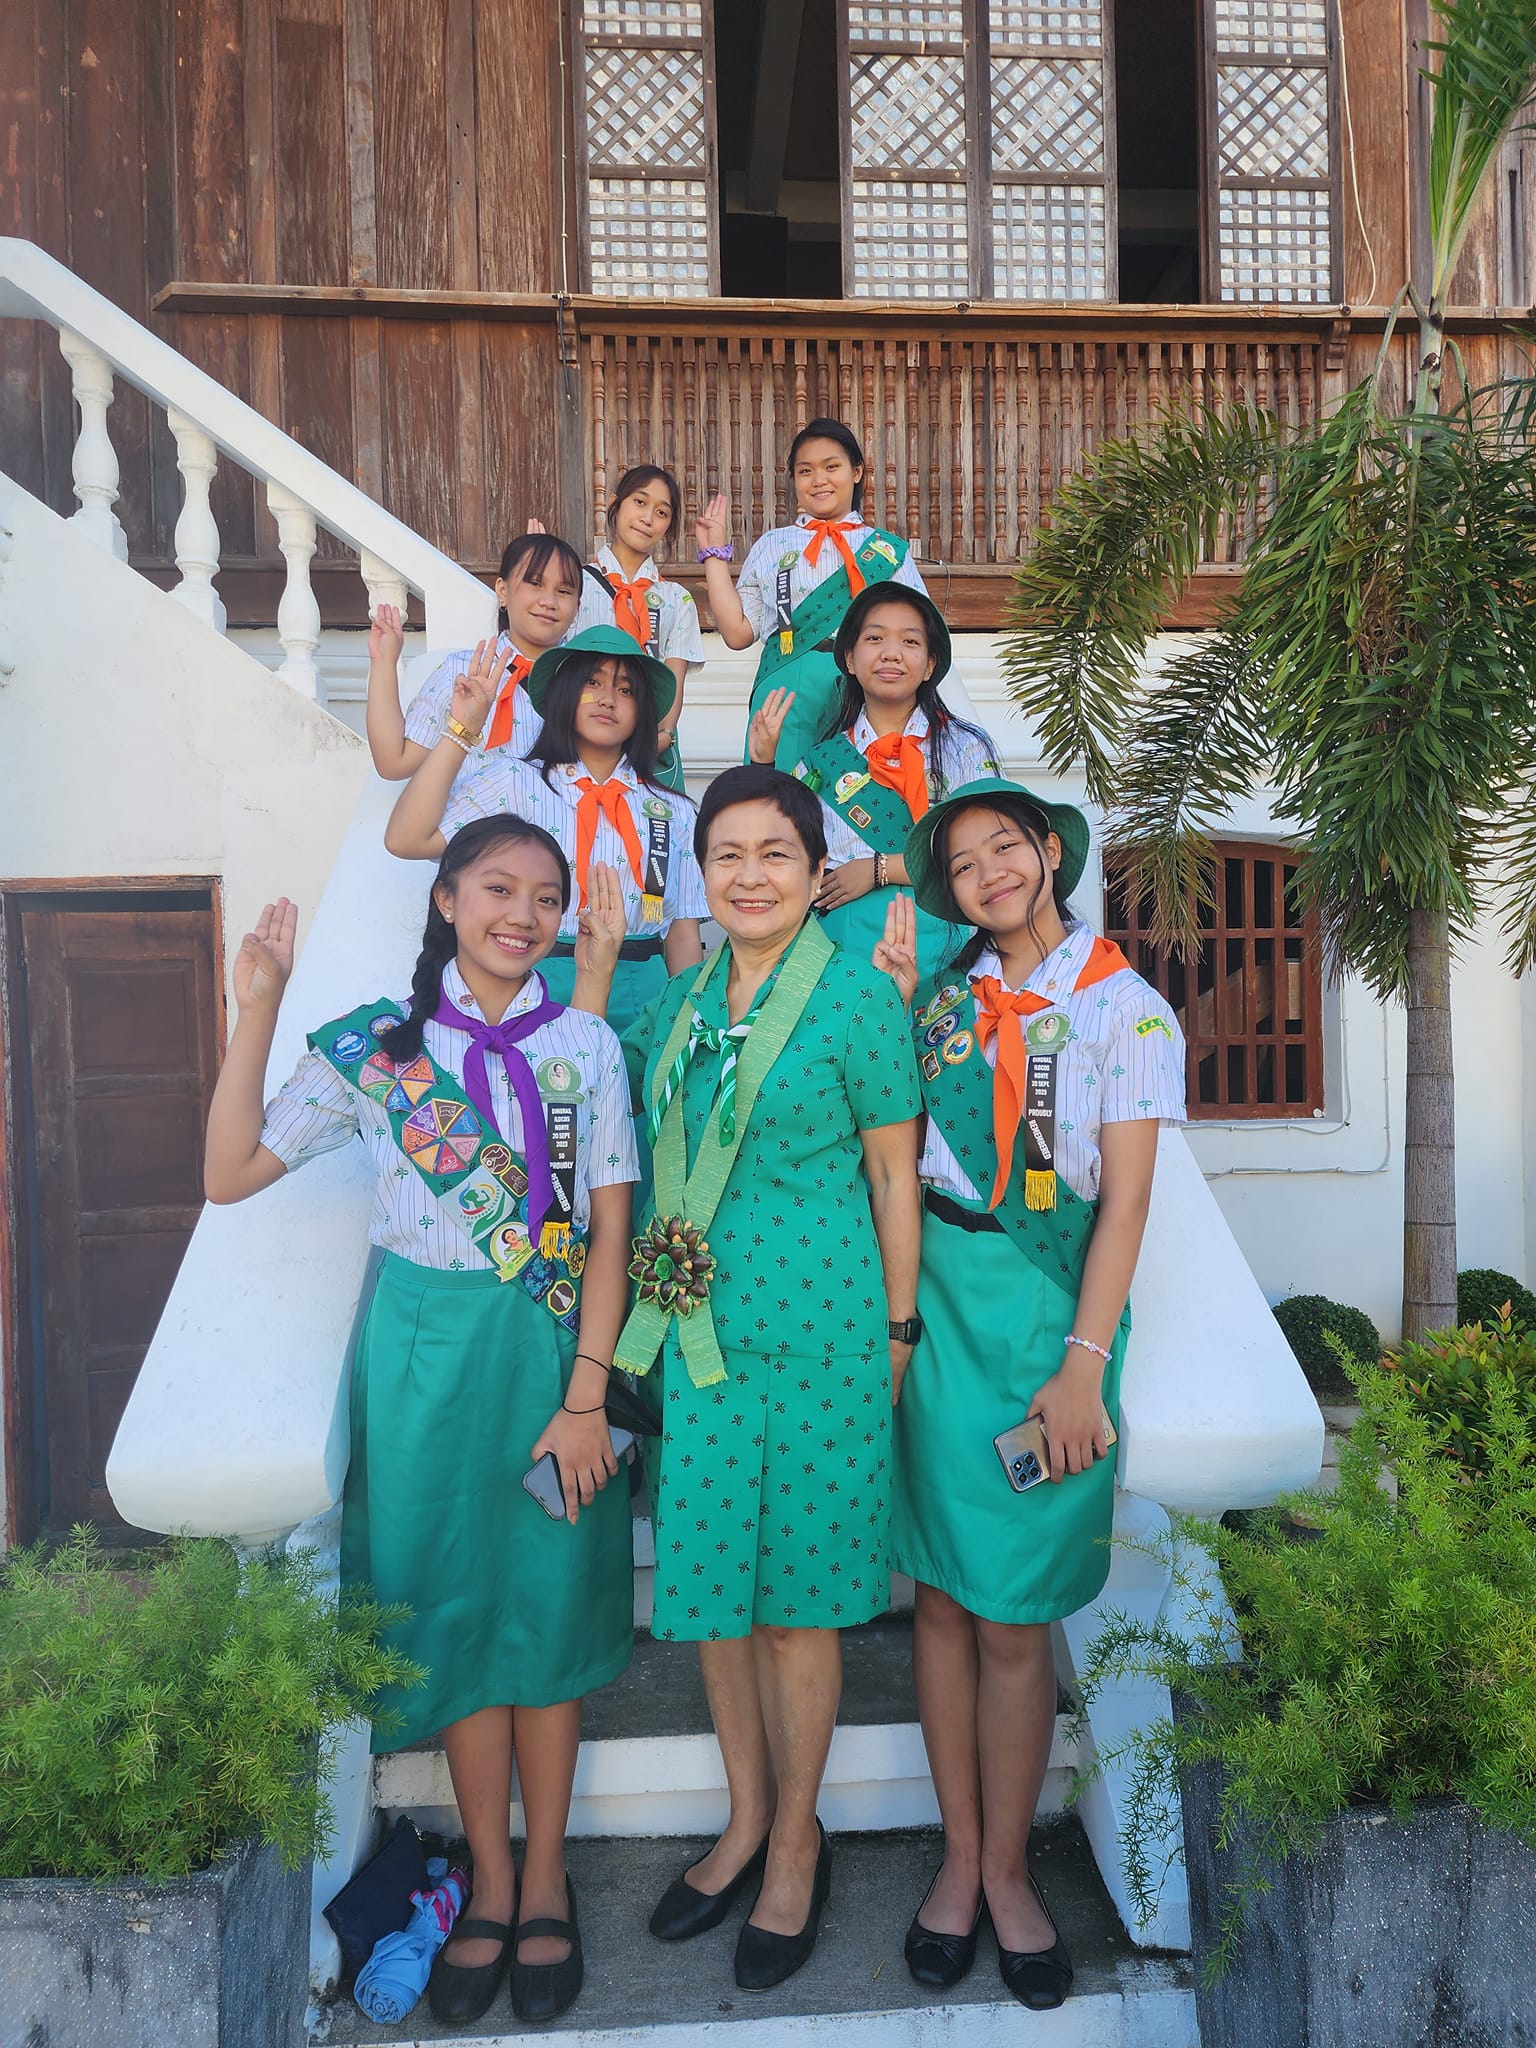 GIRL SCOUTS OF THE PHILIPPINES - Our founder, Josefa Llanes-Escoda